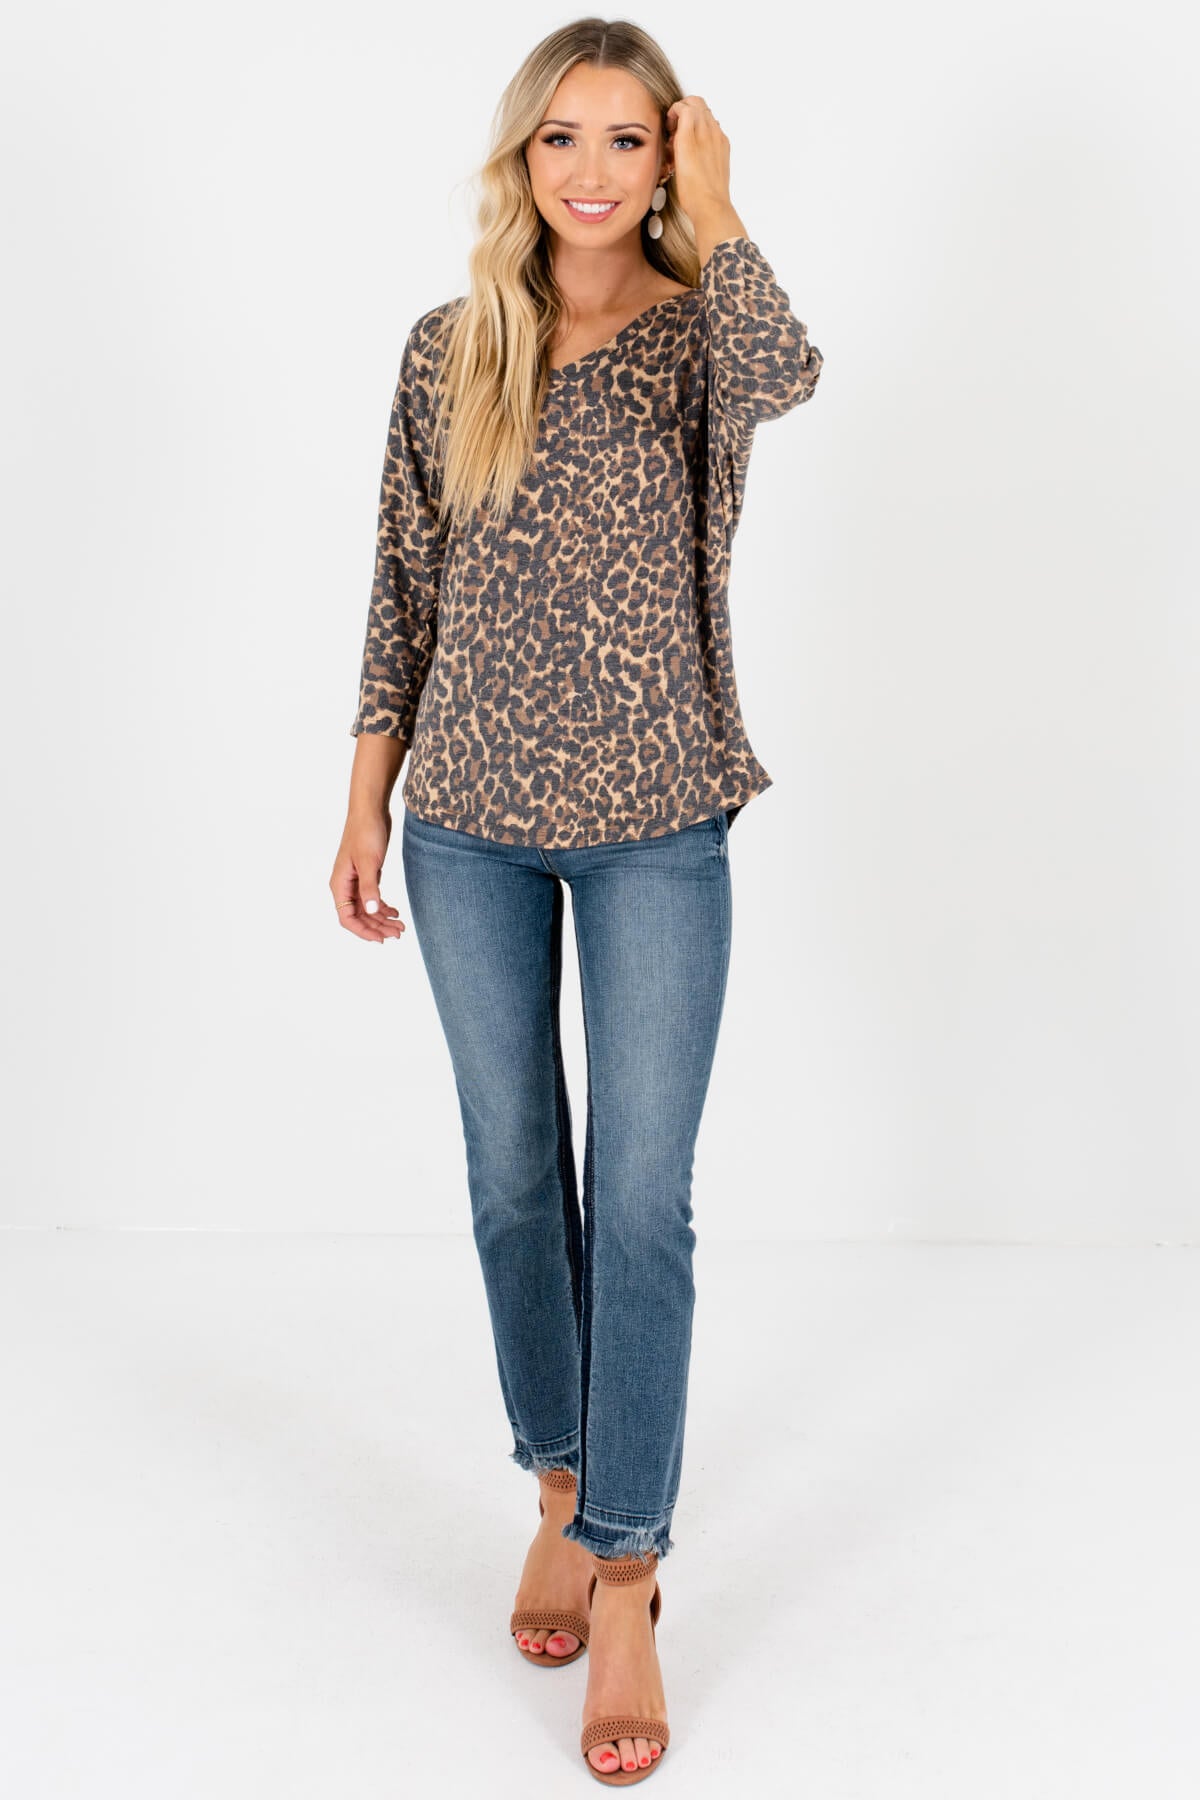 Faded Leopard Print Cute Boutique T-Shirt Tees and Tops for Women